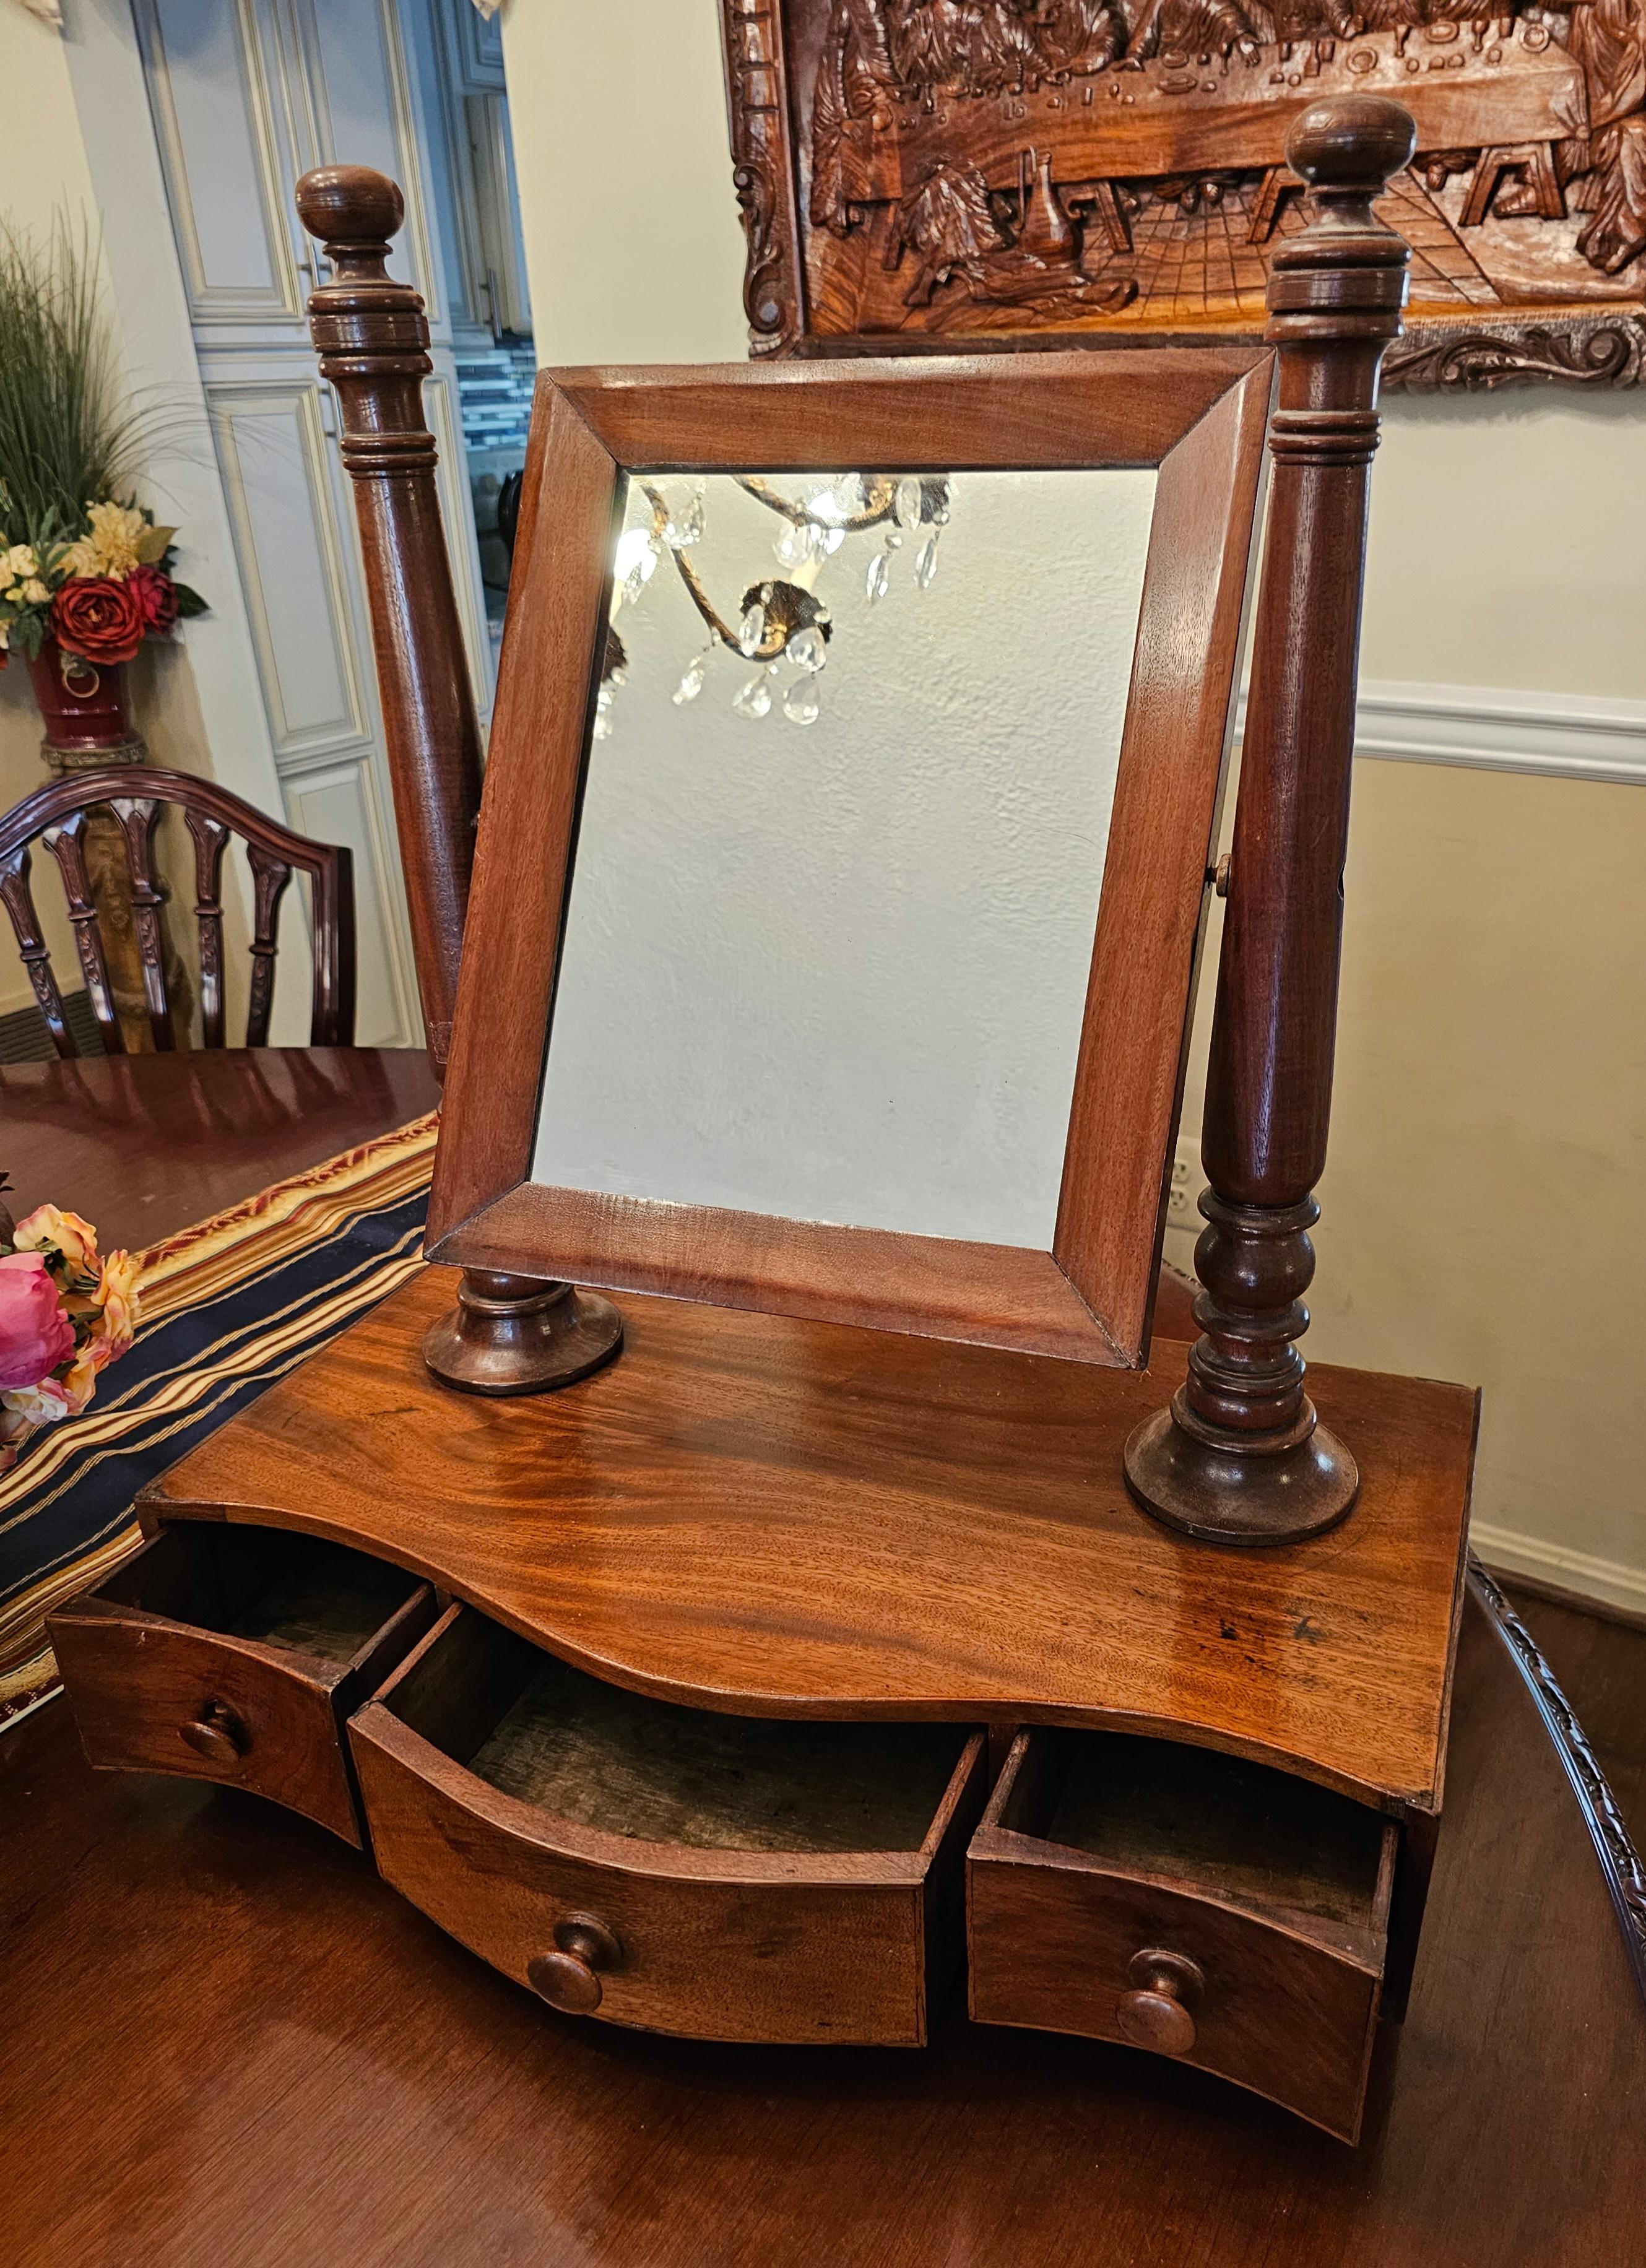 A 19th Victorian Mahogany Shaving Mirror or dress mirror to go on the table or on the Chest. Mirror comes apart for easy handling
Measures 21.75